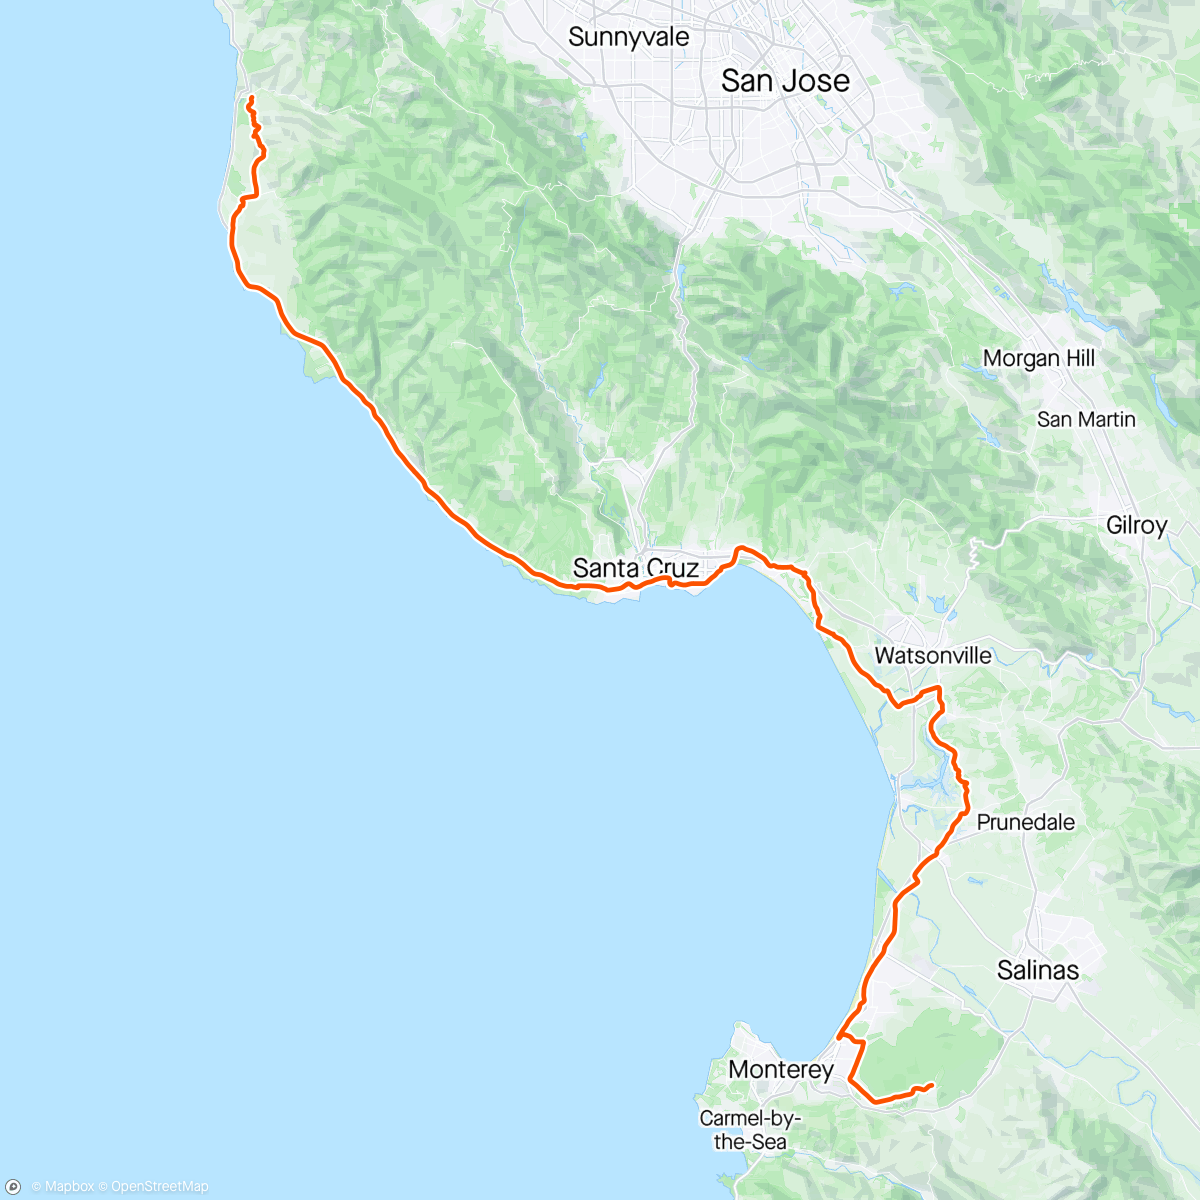 Map of the activity, channeling my 17 y/o self and flooded with memories of this coastline from that chapter. vans, flat pedals and the $4 dump frame northbound headwind retribution sea otter tour commute stage 2. :)